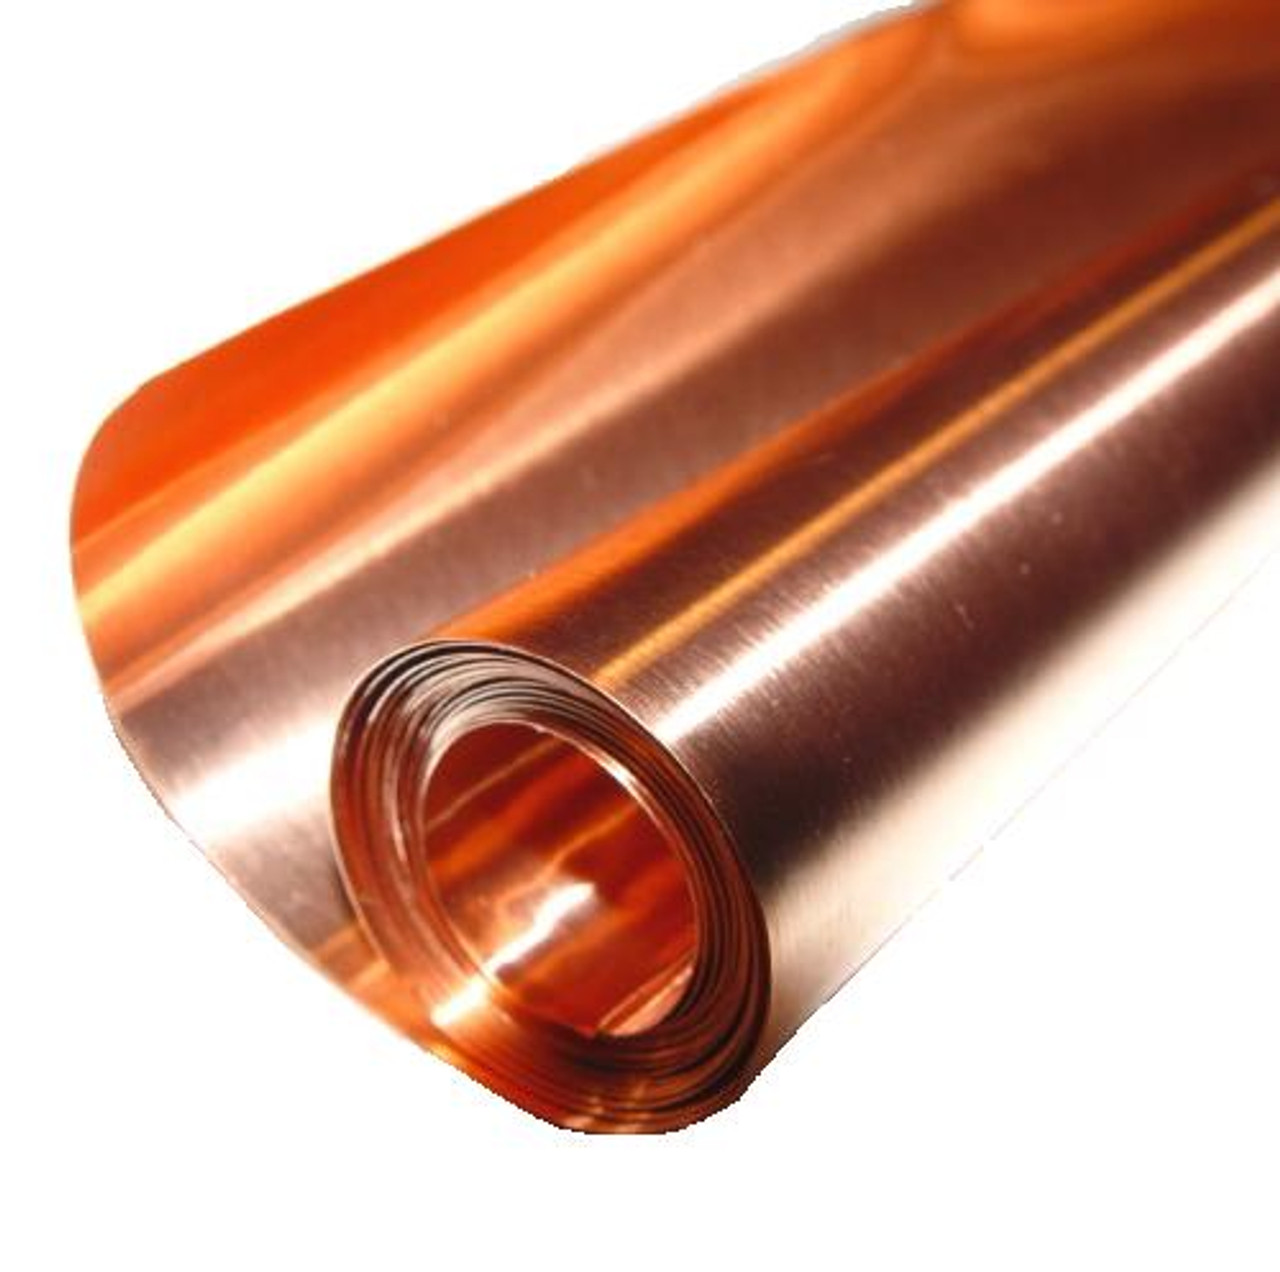 Copperlab Hammered Copper Sheets - Buy Copper Sheeting 12 x 24